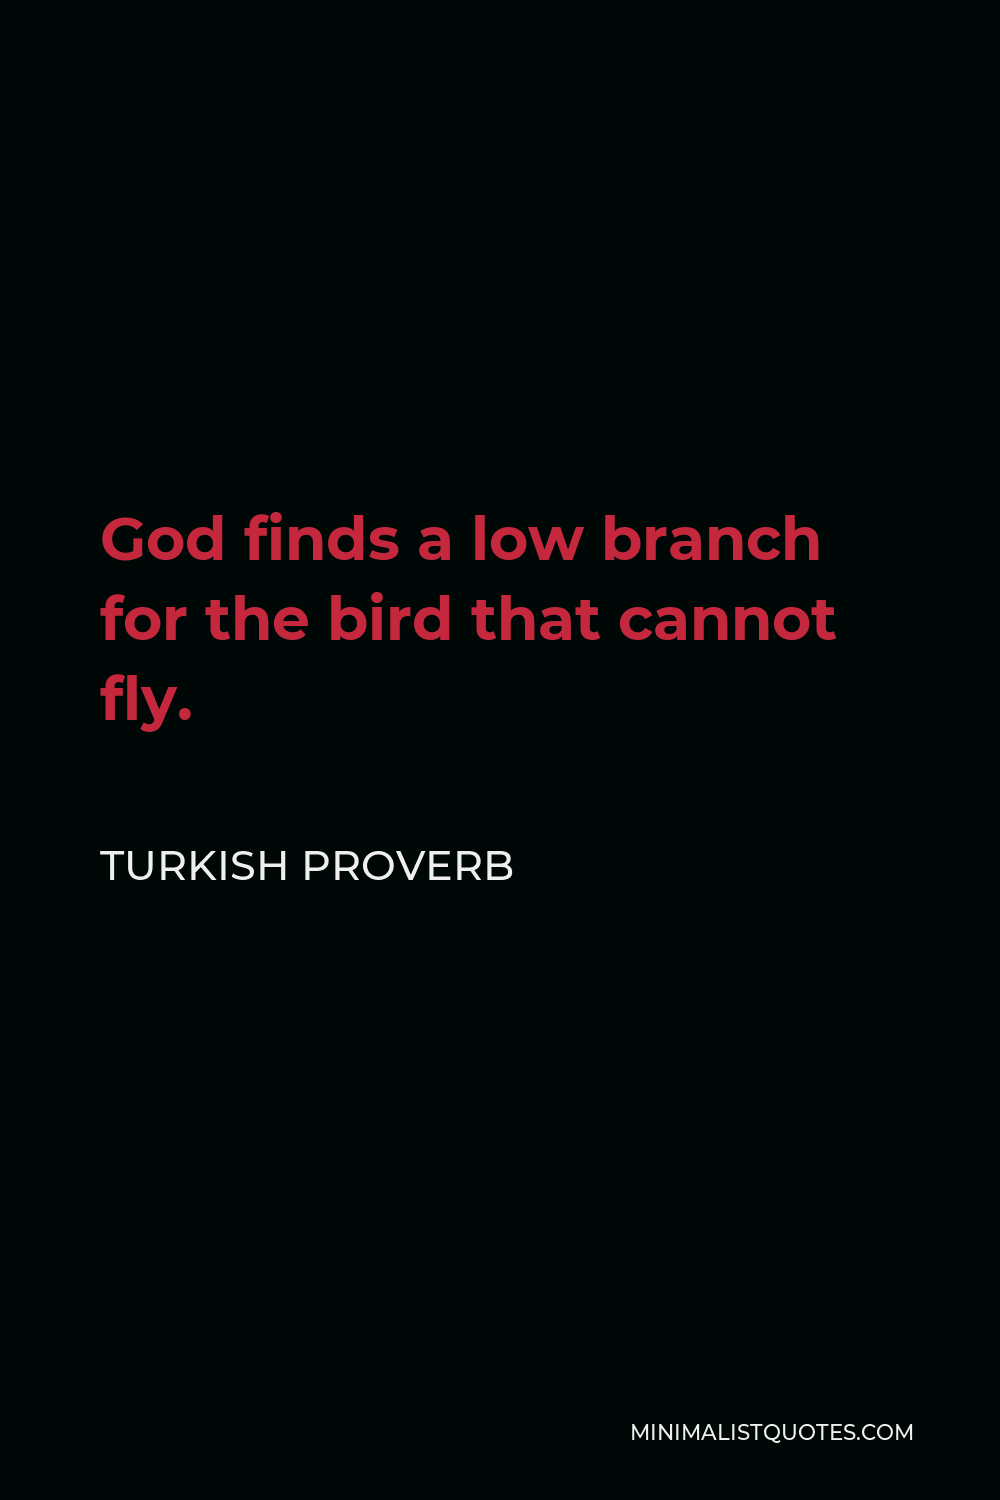 Turkish Proverb Quote - God finds a low branch for the bird that cannot fly.